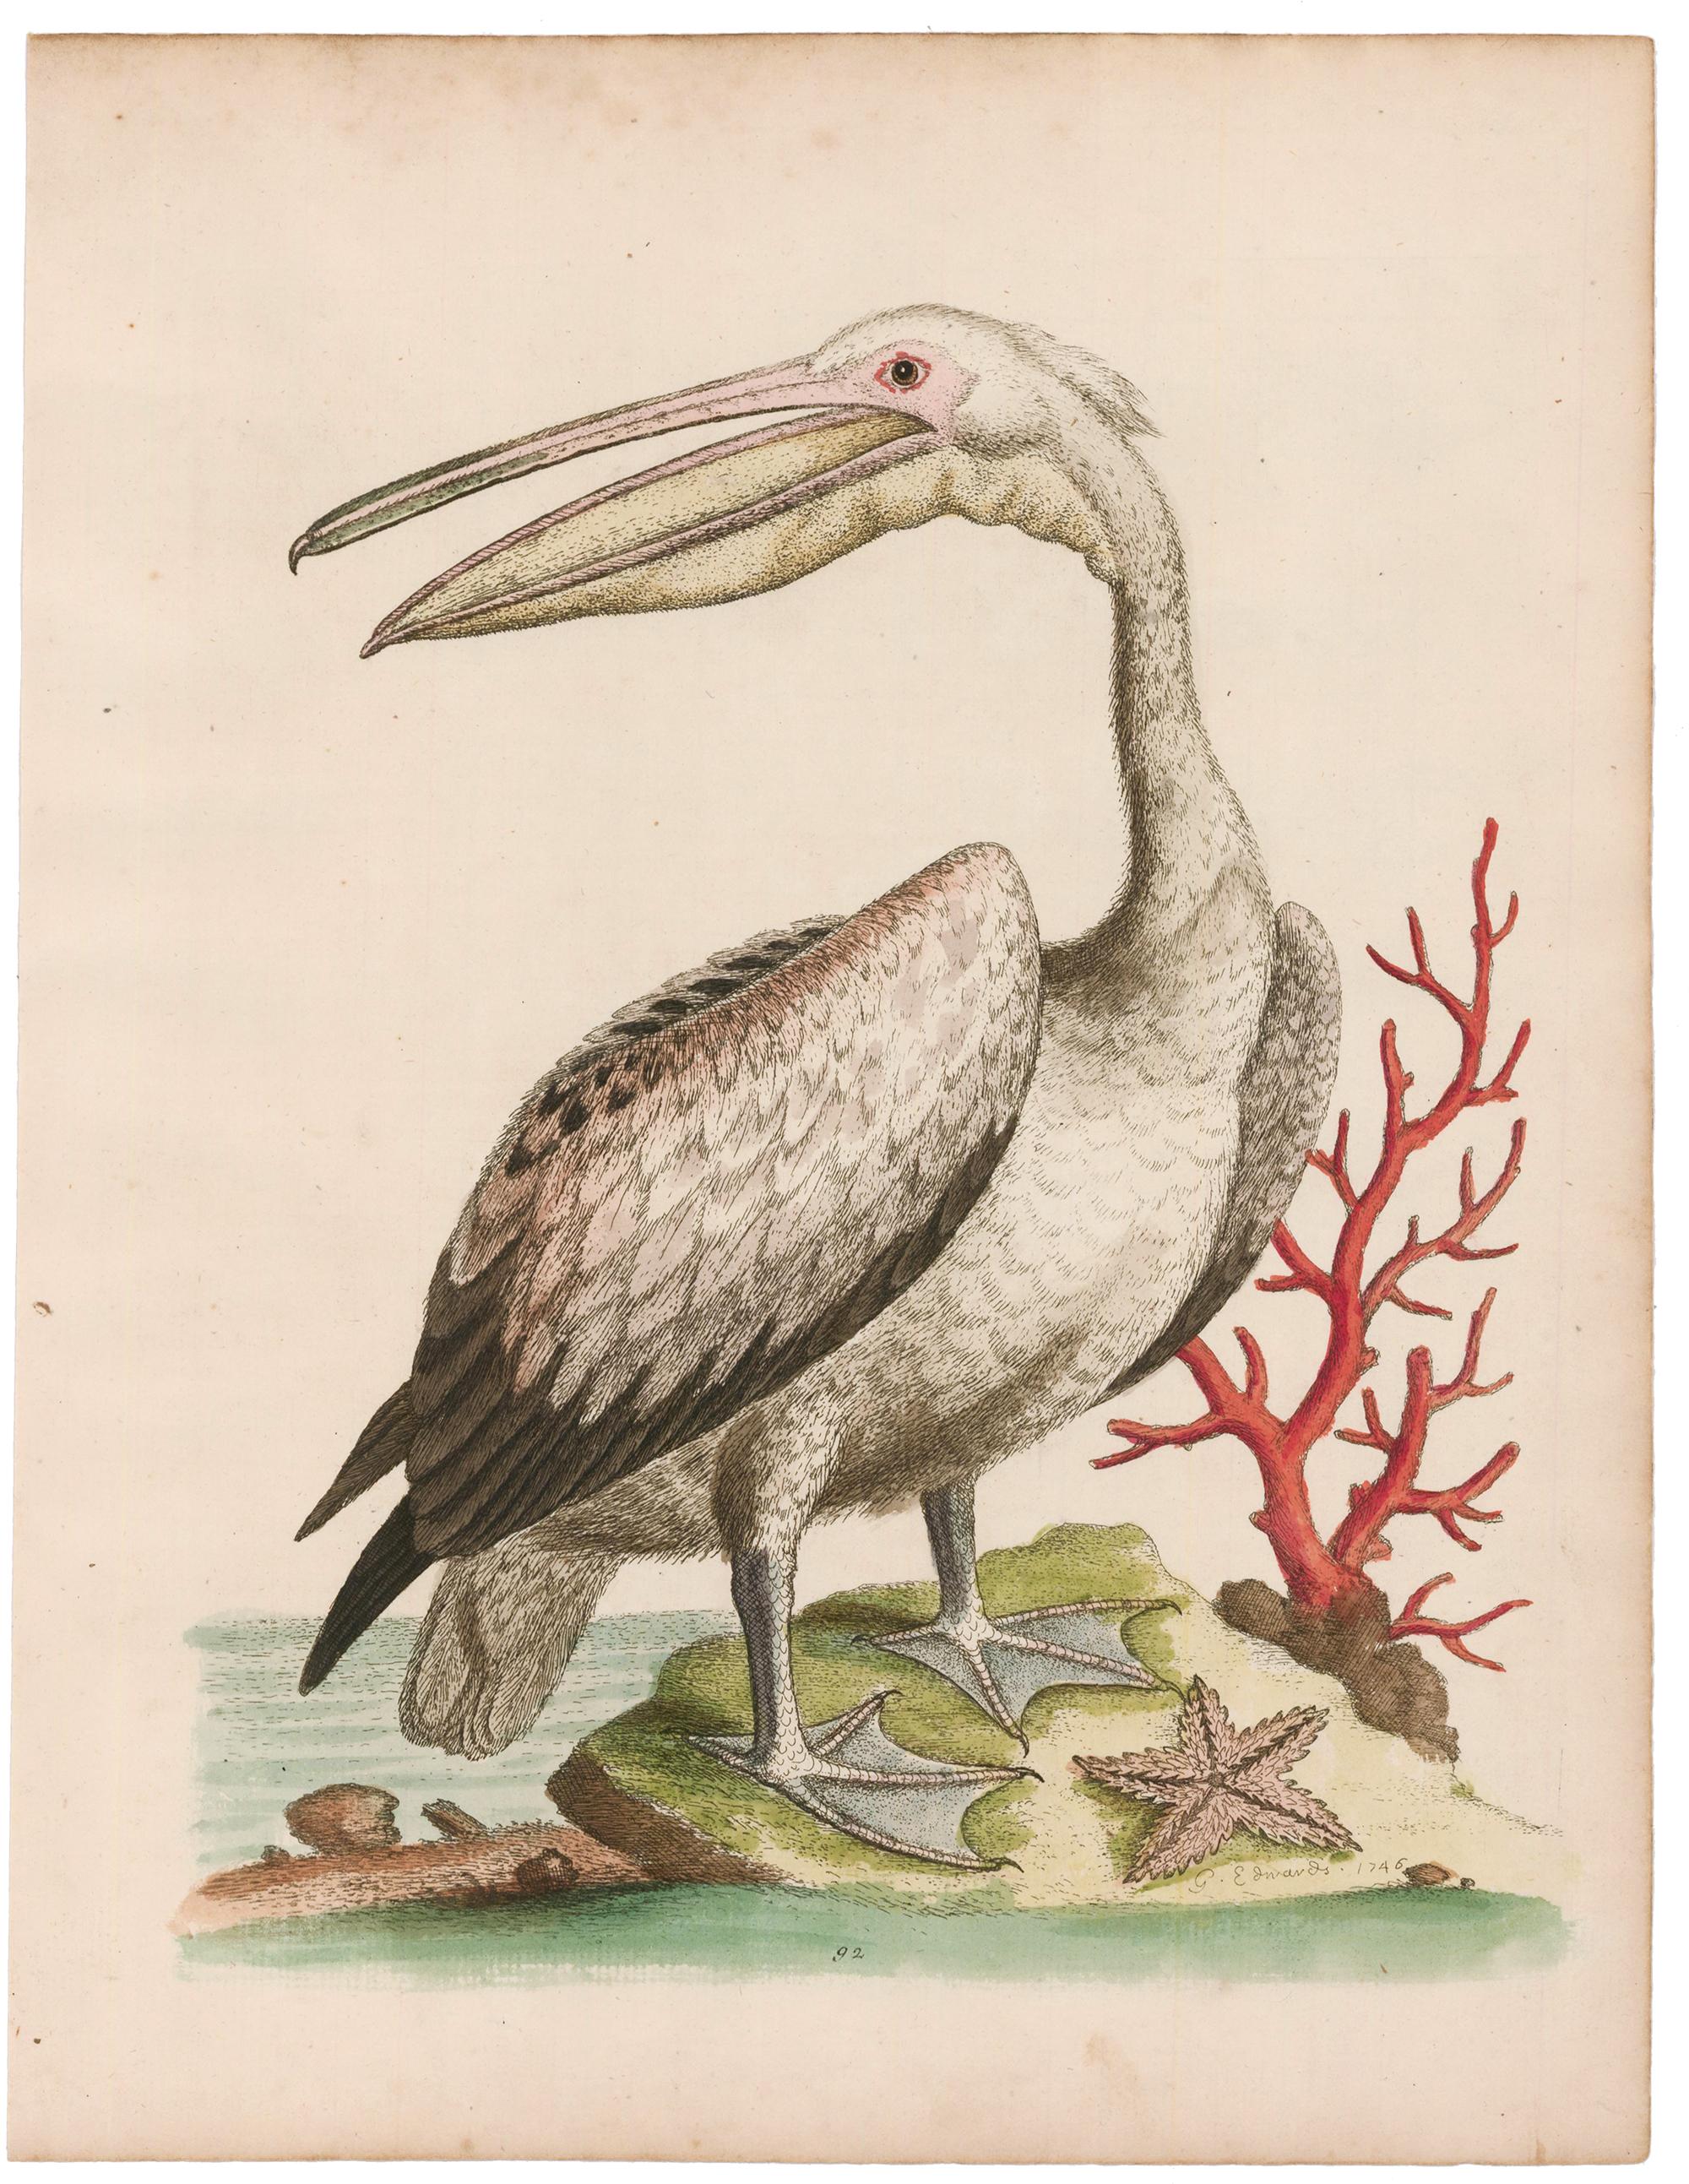 Pair of Hand-Colored Pelican Engravings - Print by George Edwards